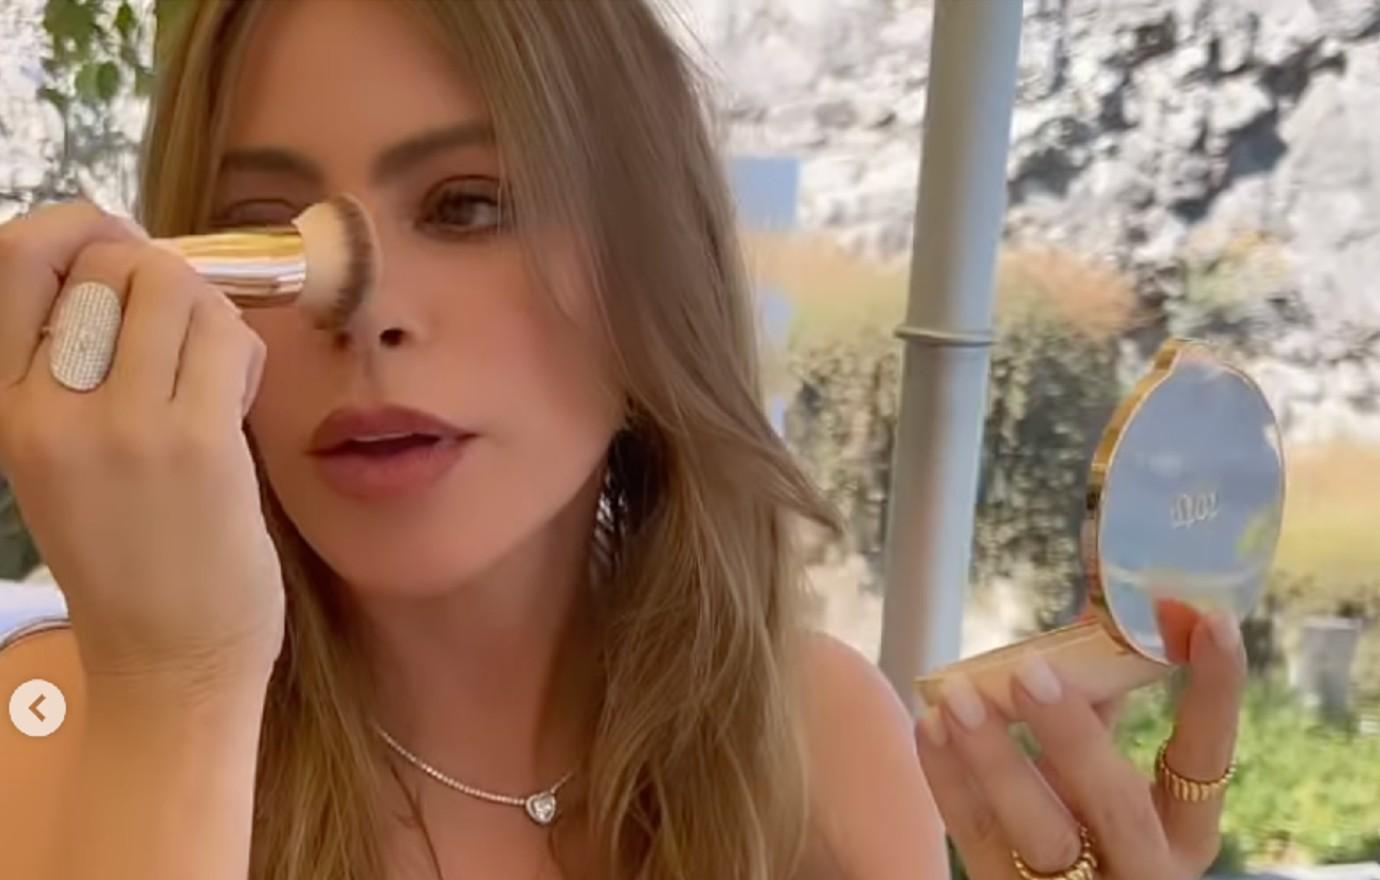 Sofia Vergara's fans demand she 'calm down' with photoshop as her face  looks distorted in new video amid split from Joe